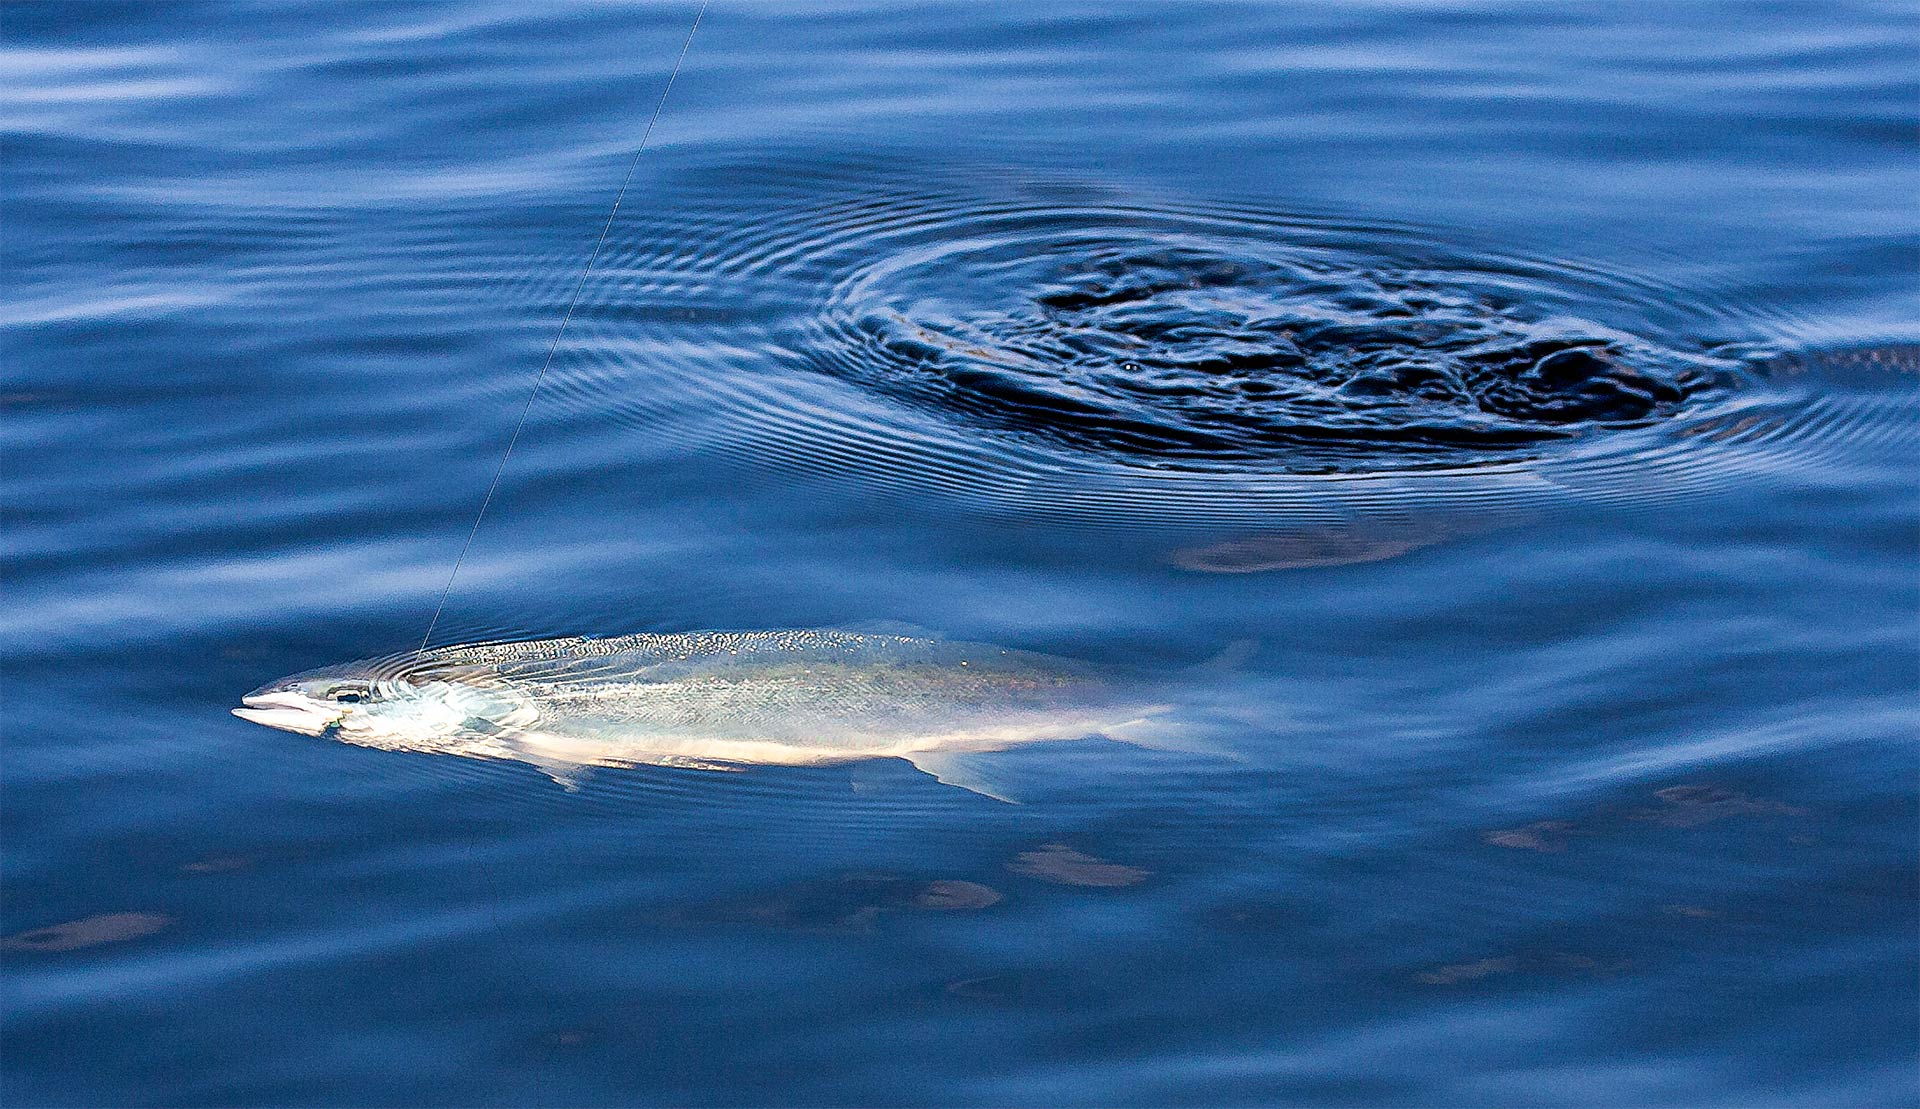 Rainbow trout under the surface